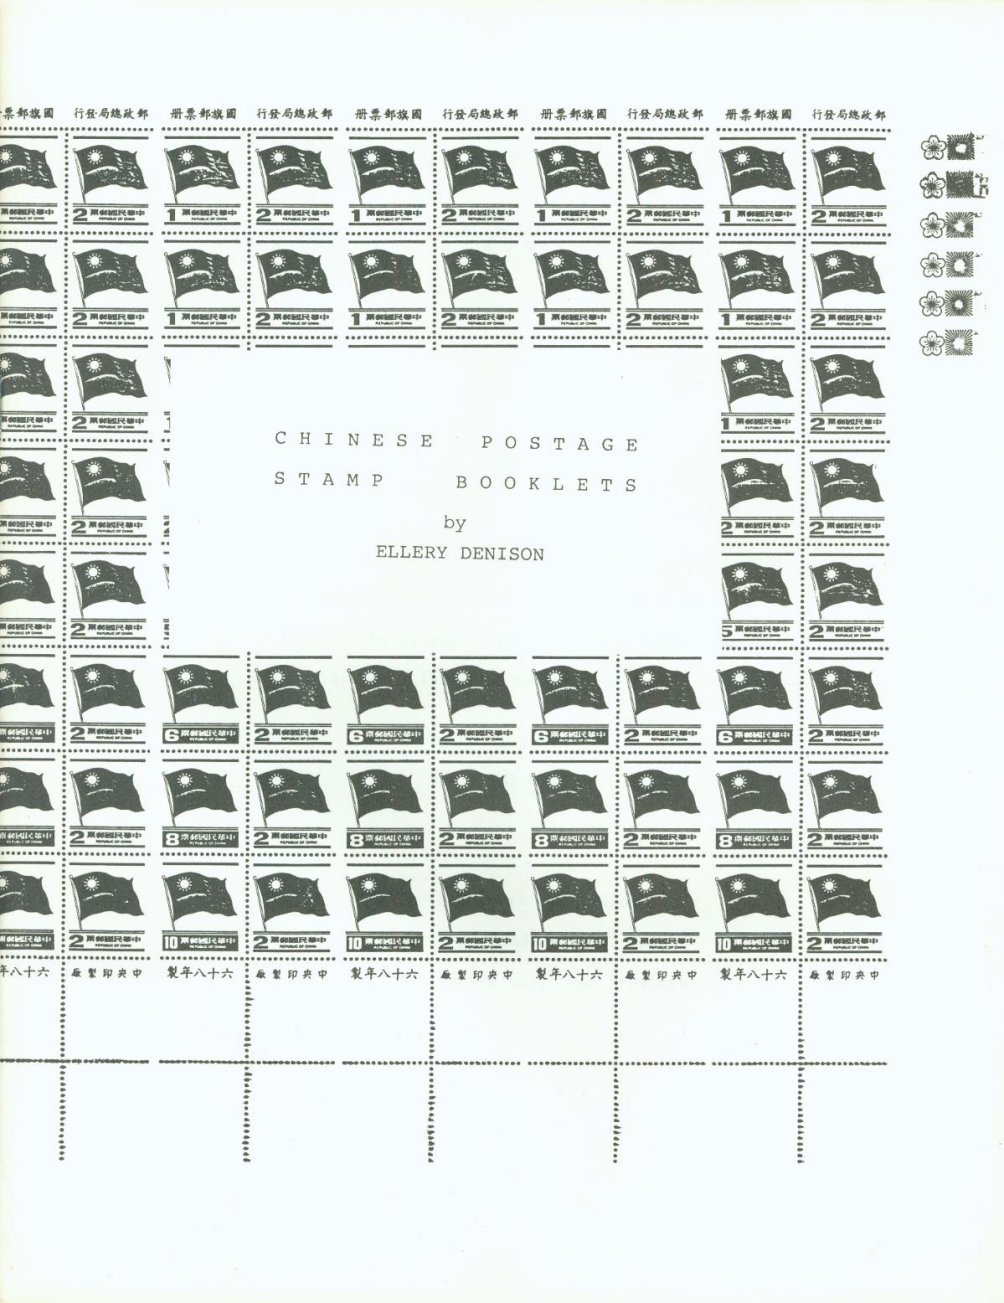 Chinese Postage Stamp Booklets by Ellery Dennison (1981). Covering all booklets and booklet panes from 1917 to 1980, 41 pages in black and white, with a soft cover. Published by the China Stamp Society.